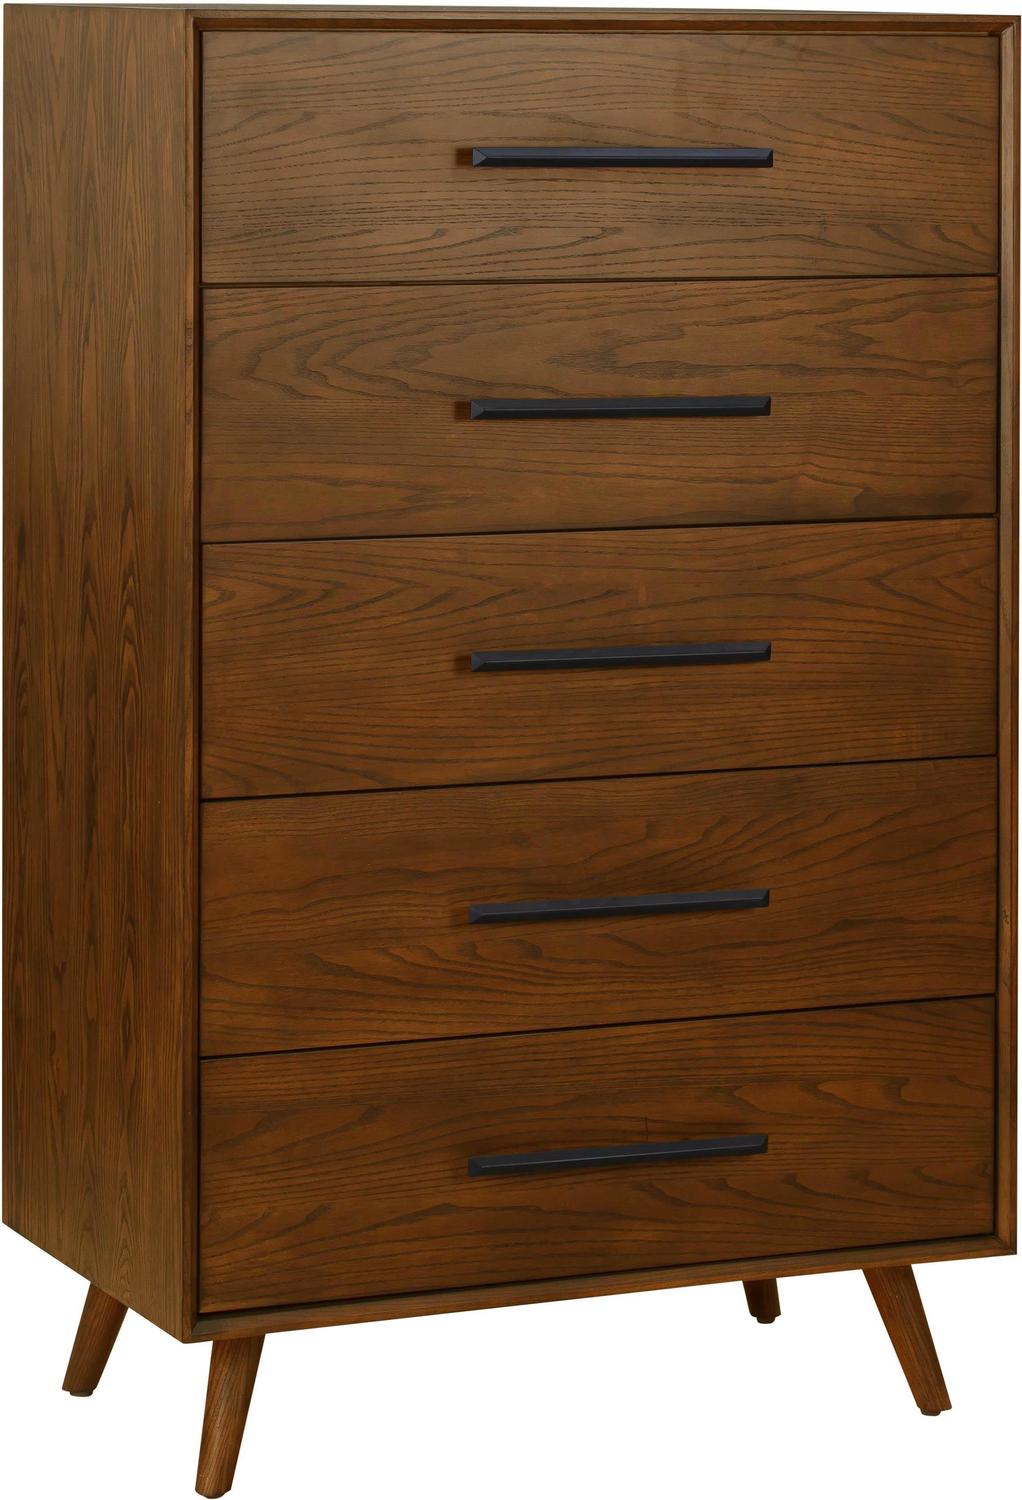  Tov Furniture Dressers Chests and Cabinets Walnut